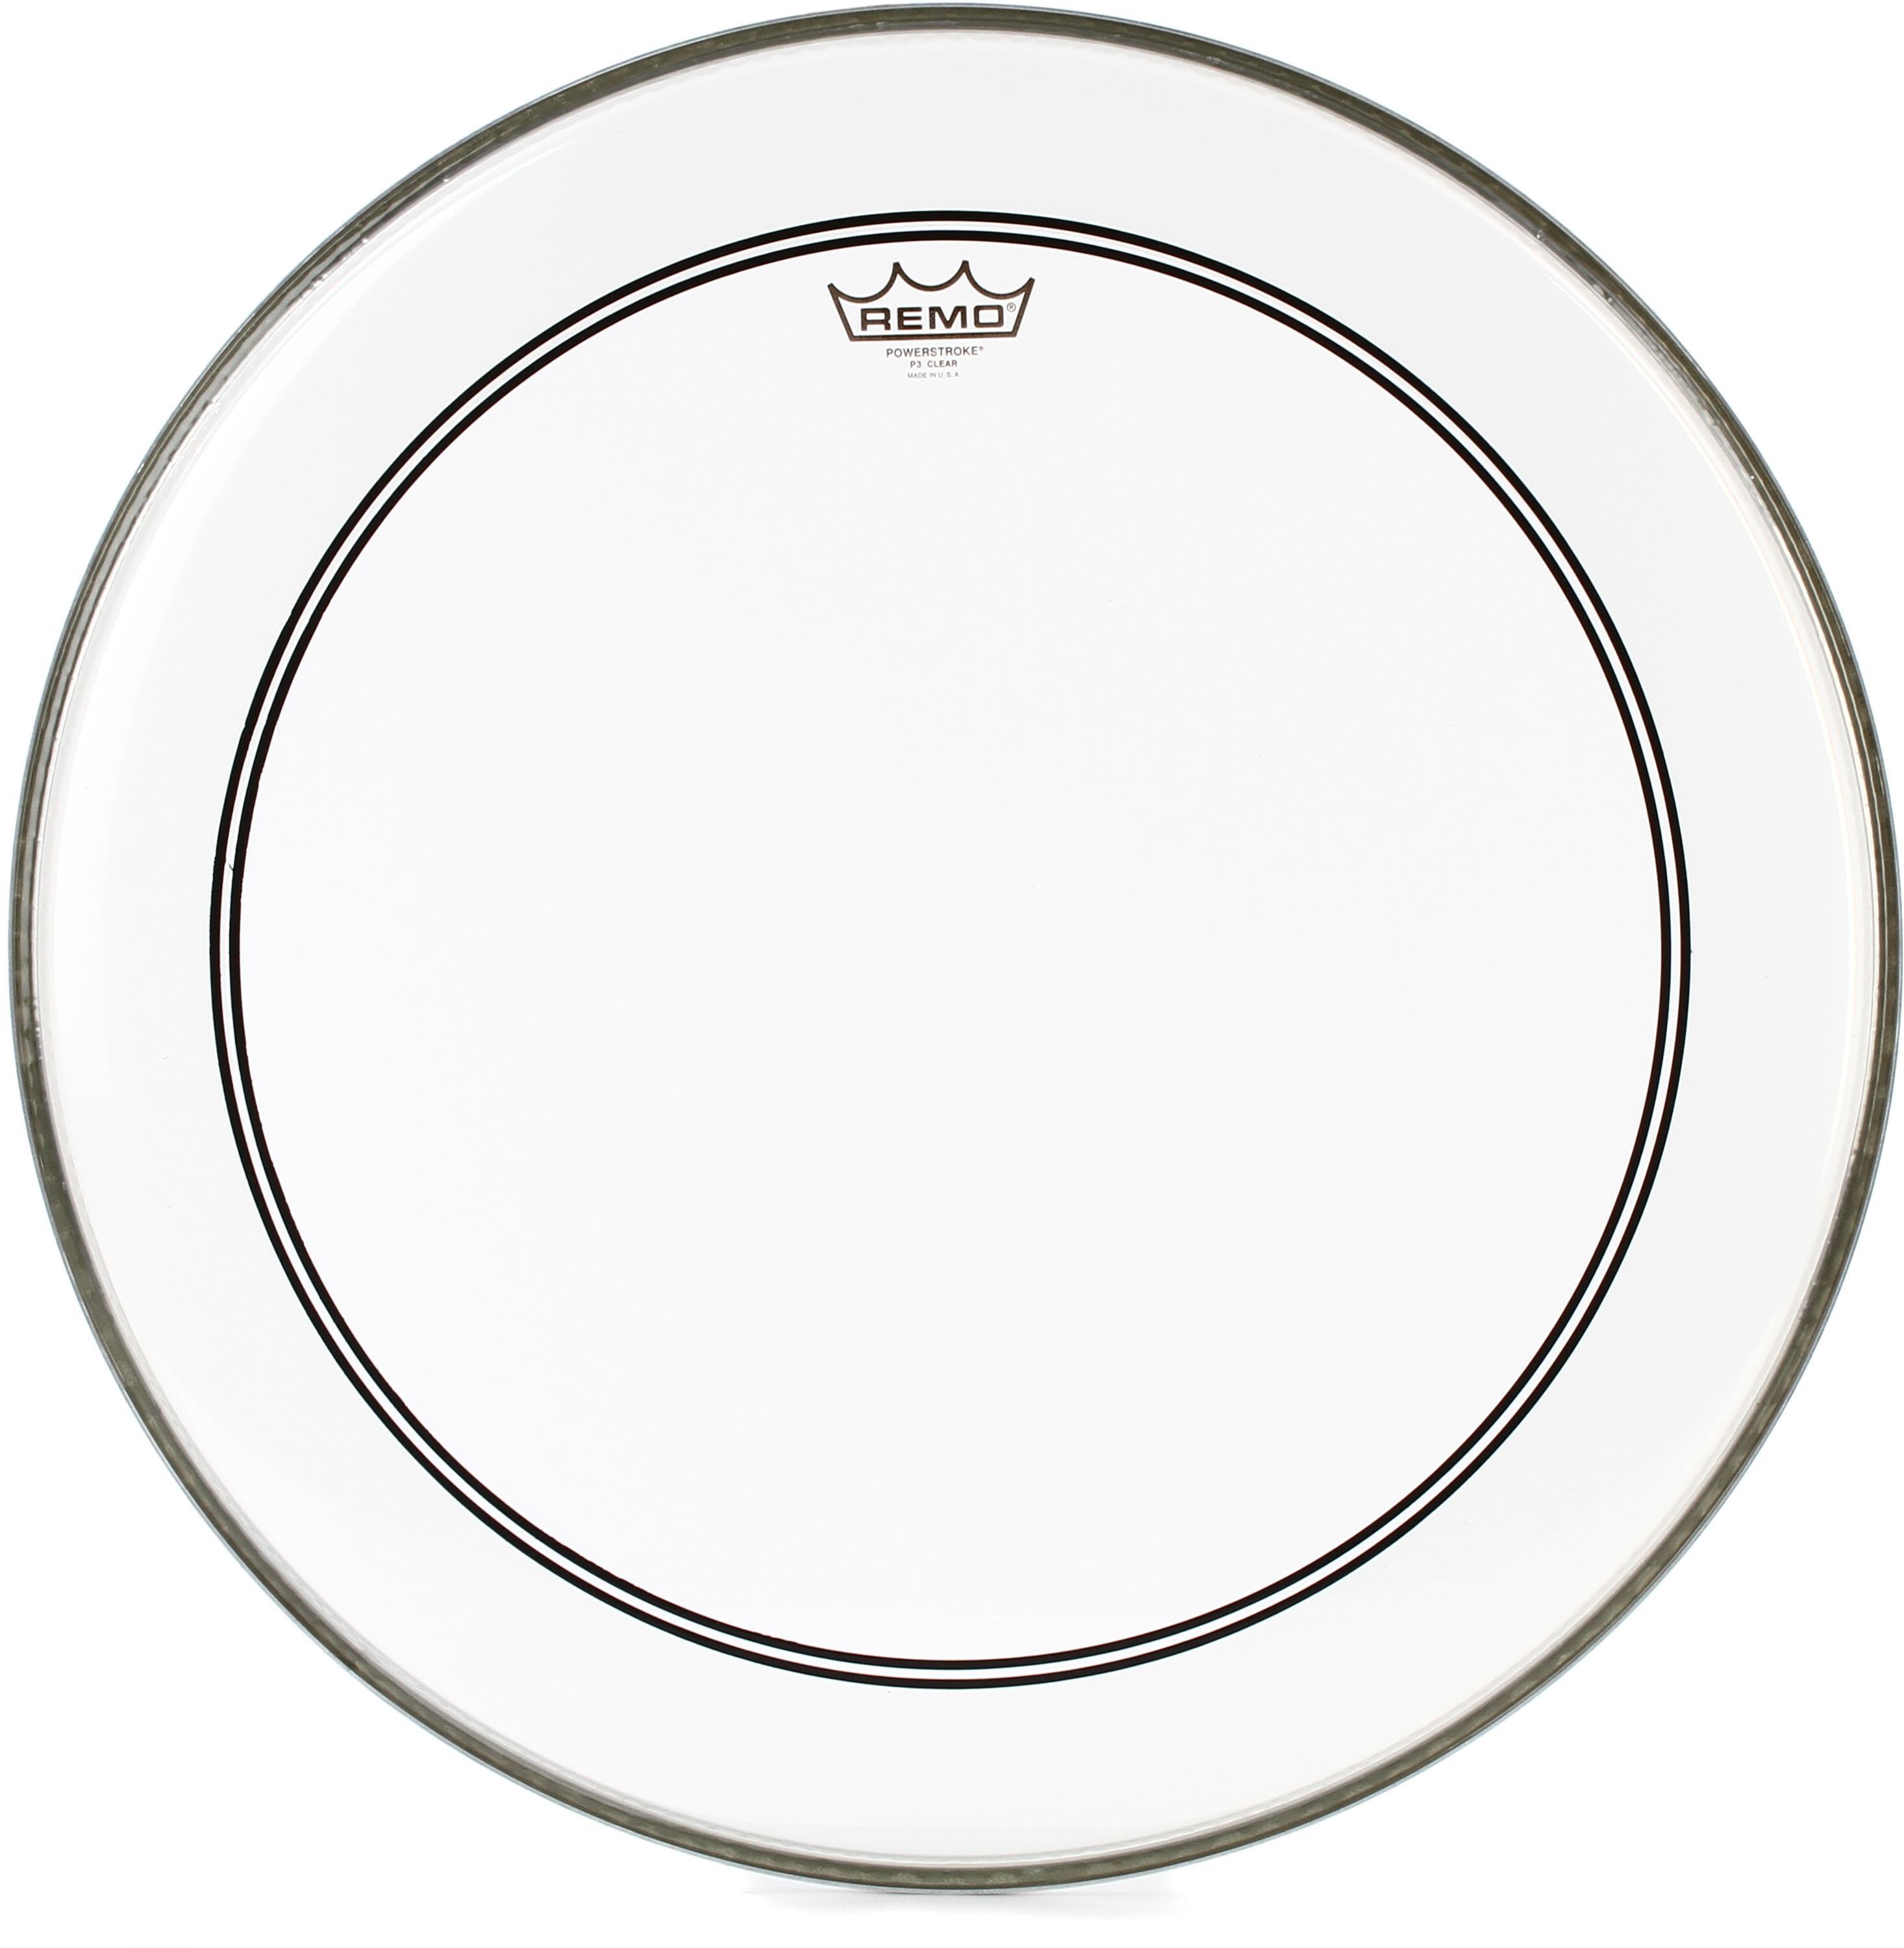 Bundled Item: Remo Powerstroke P3 Clear Bass Drumhead - 22 inch with 2.5 inch Impact Pad